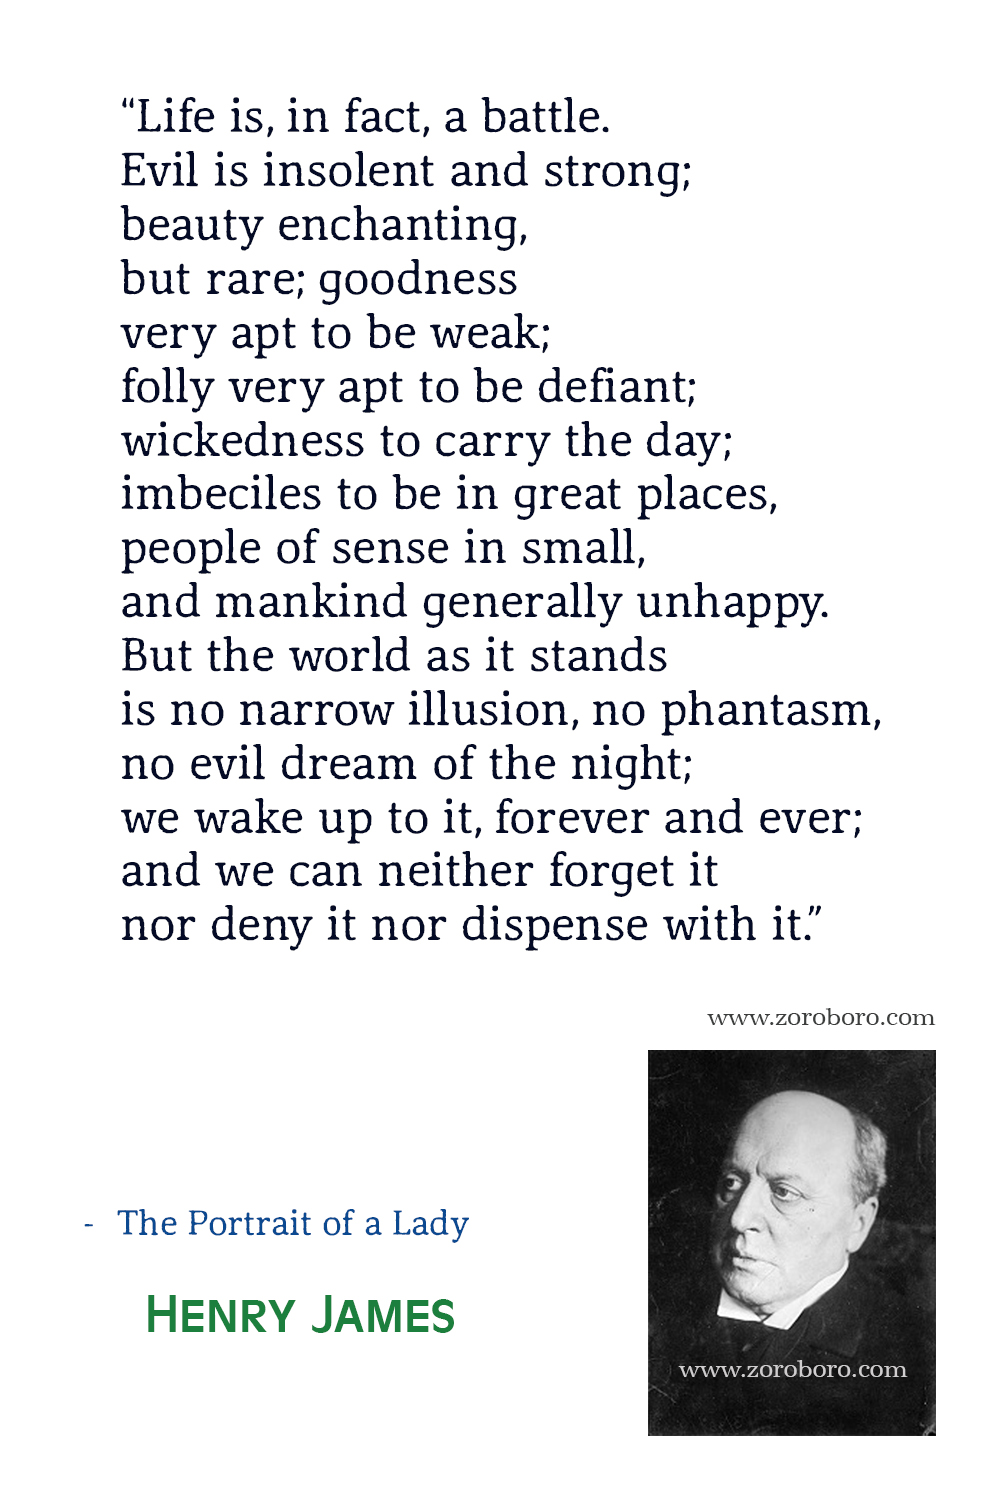 Henry James Quotes, Henry James The Portrait of a Lady Quotes, Henry James Books, Henry James Roderick Hudson Quotes. Henry James Short Stories.